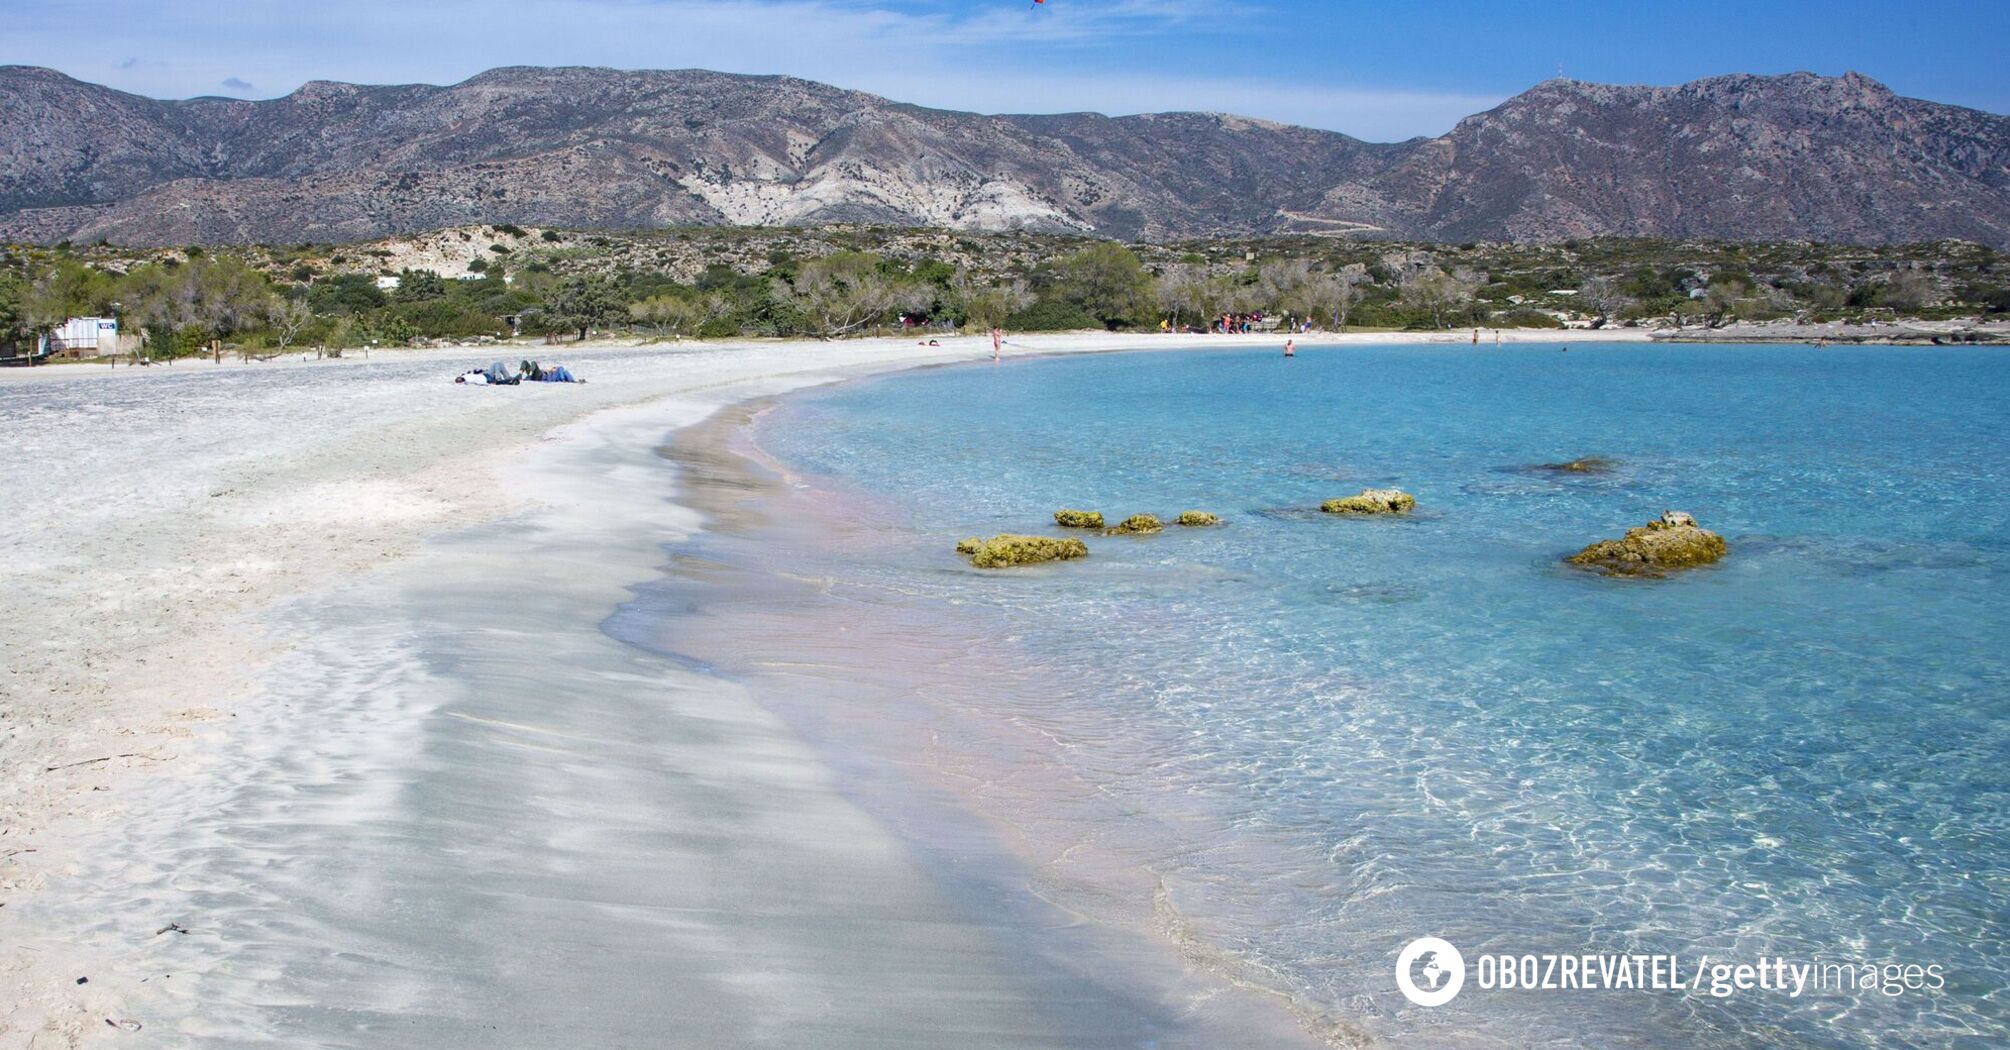 Pink sand and turquoise sea. A remote Greek beach was named one of the best in Europe